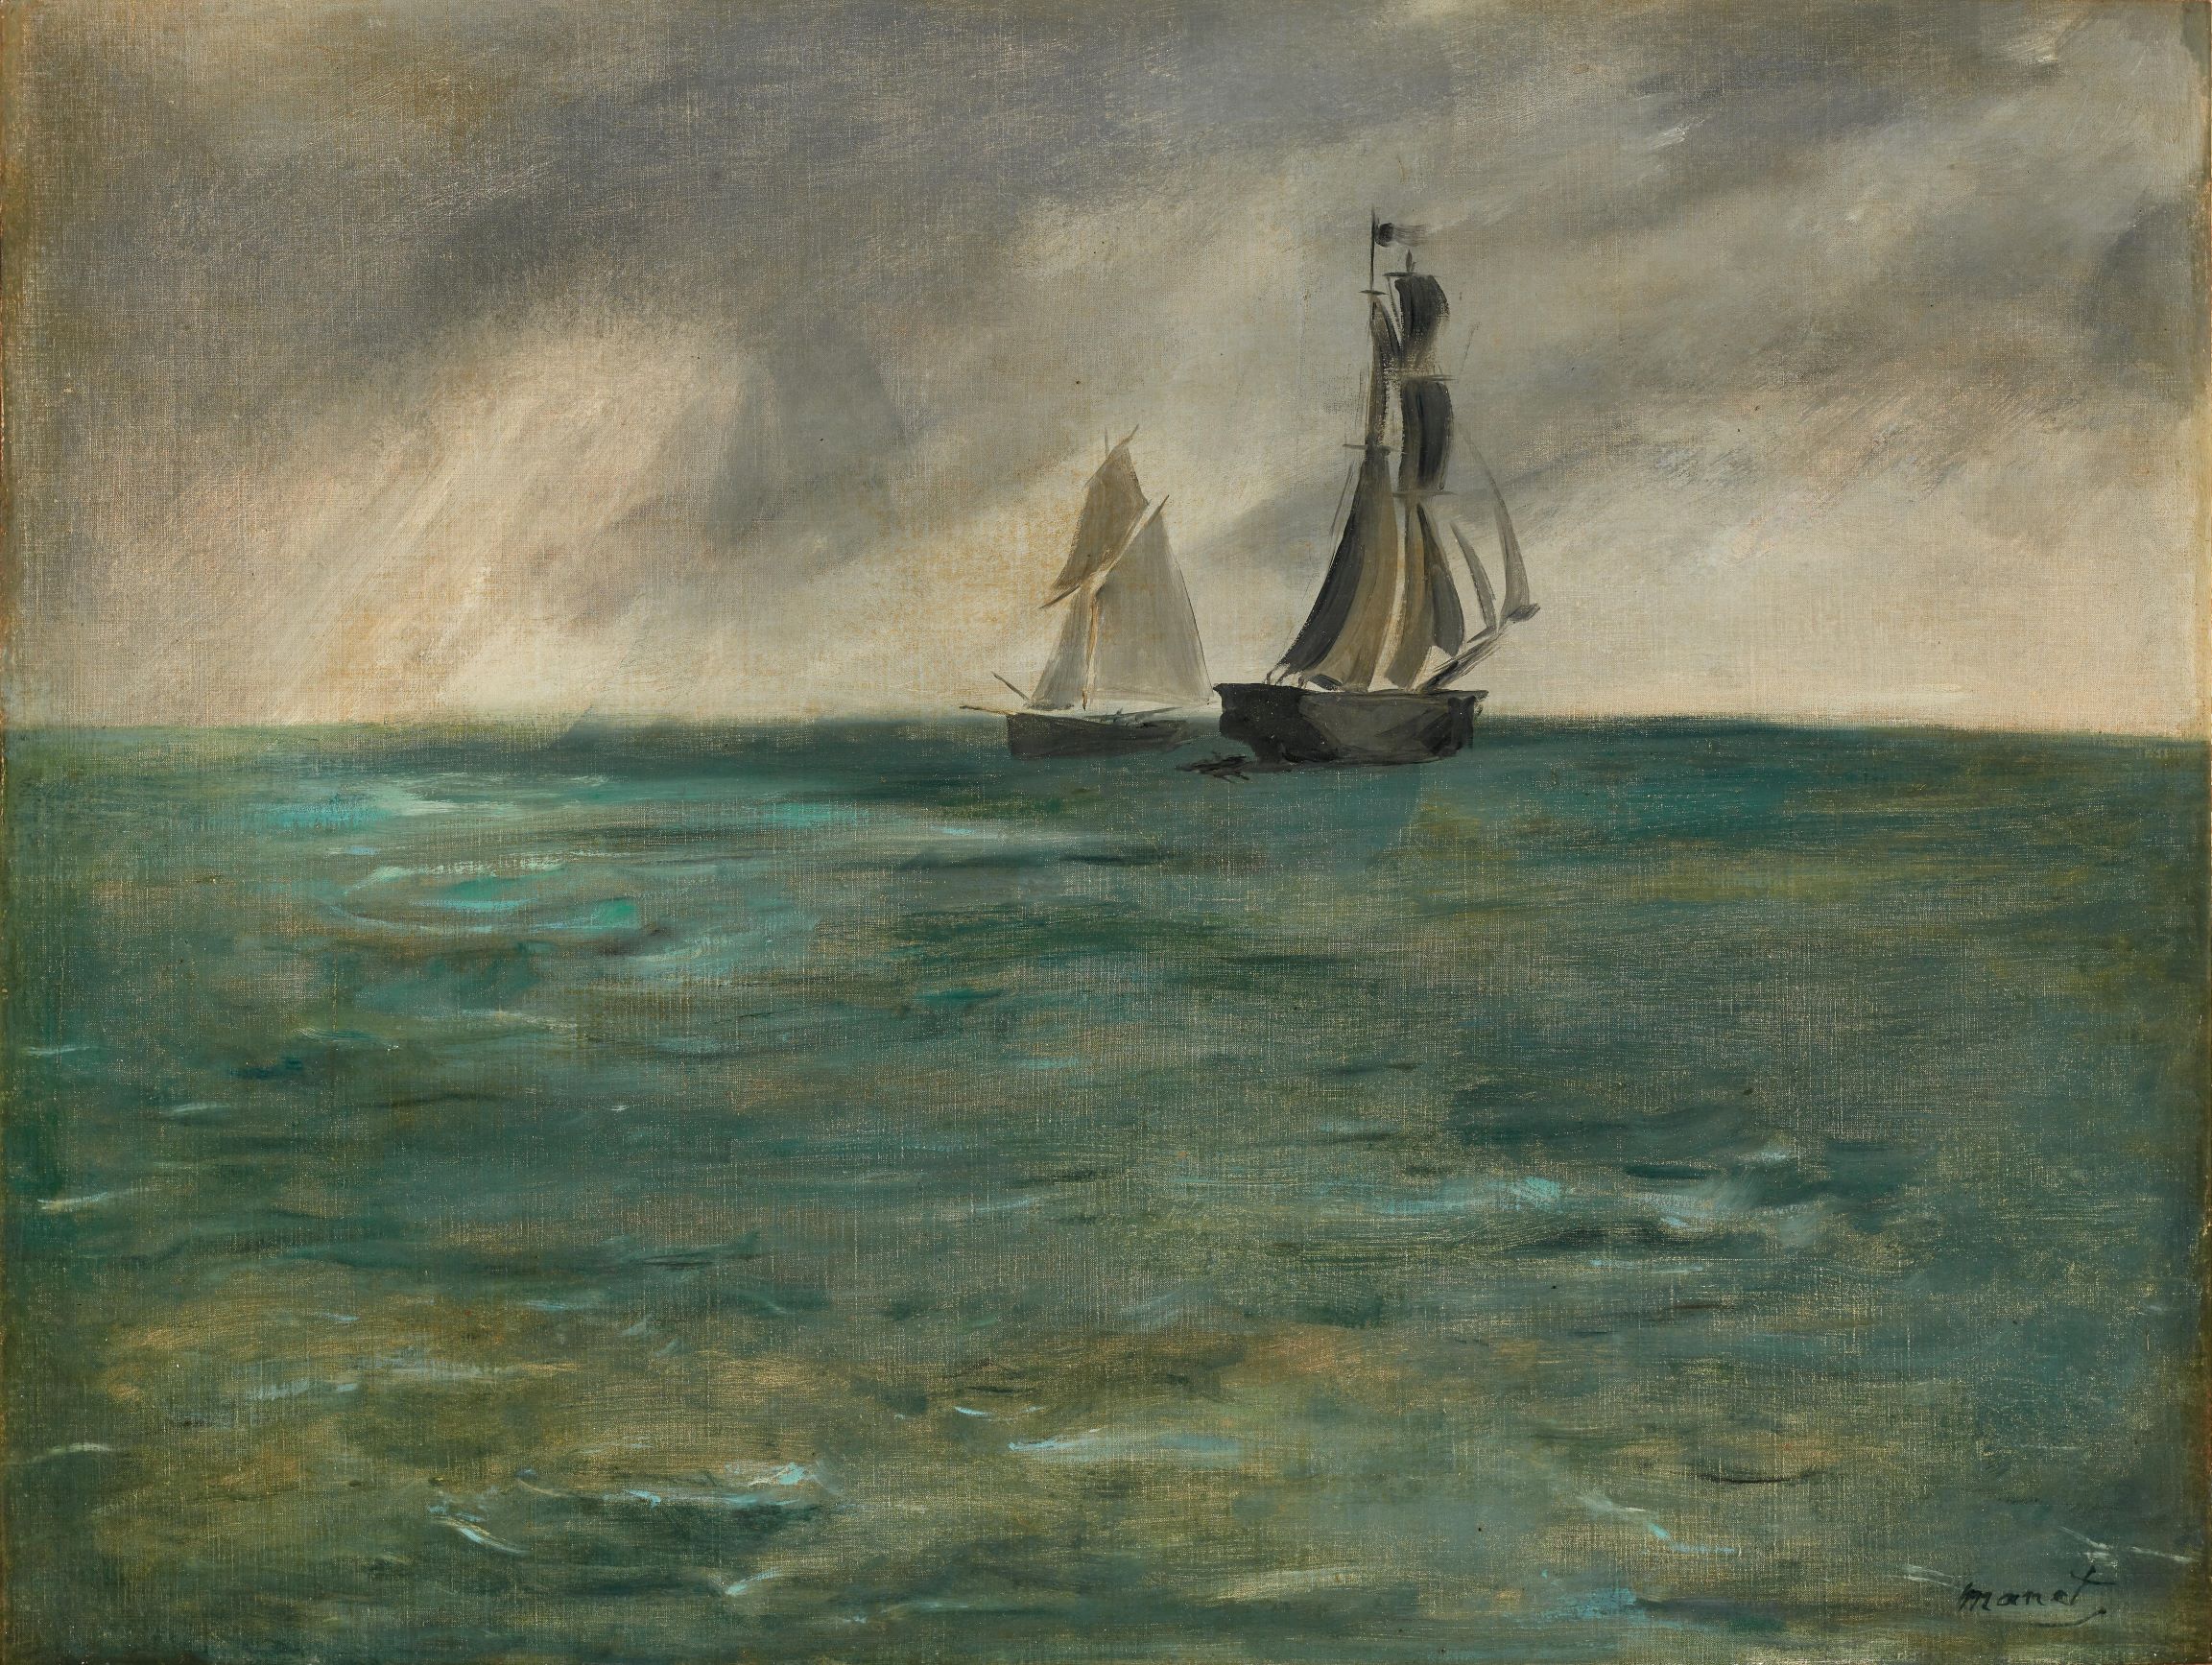 Marine, Temps d’orage (Ships at sea in stormy weather)